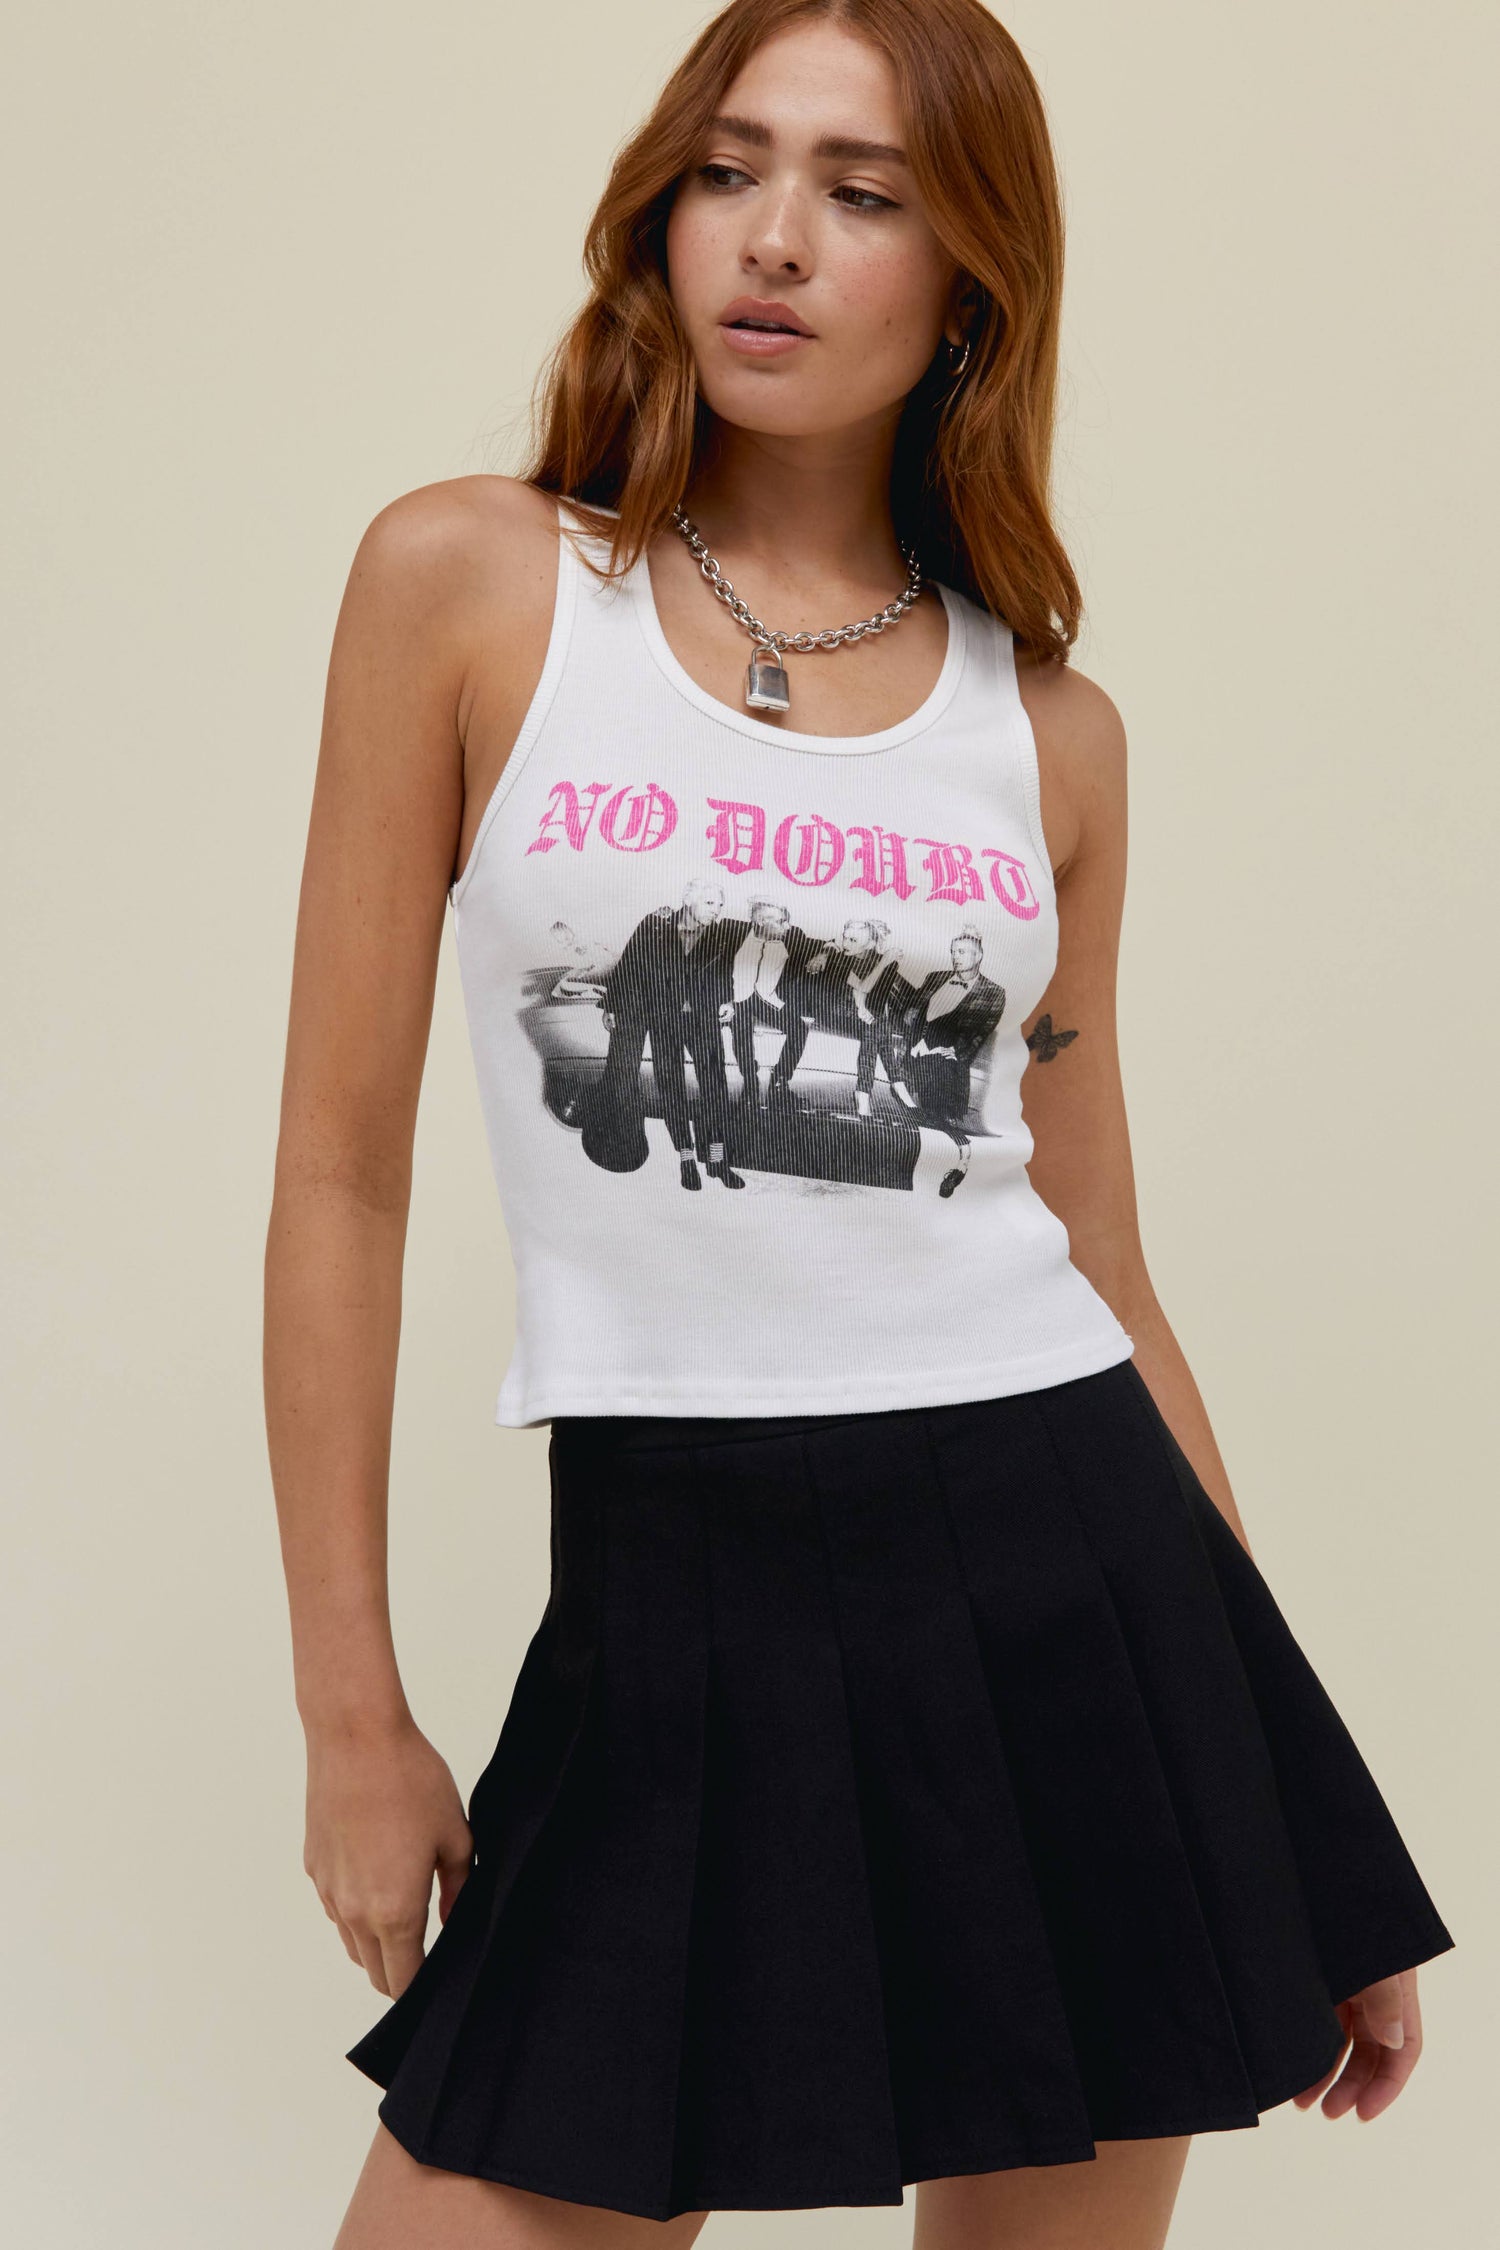 Model wearing a No Doubt graphic tank in white stamped with a rendition of No Doubt’s logo, designed with a black and white scanned portrait of the crew.